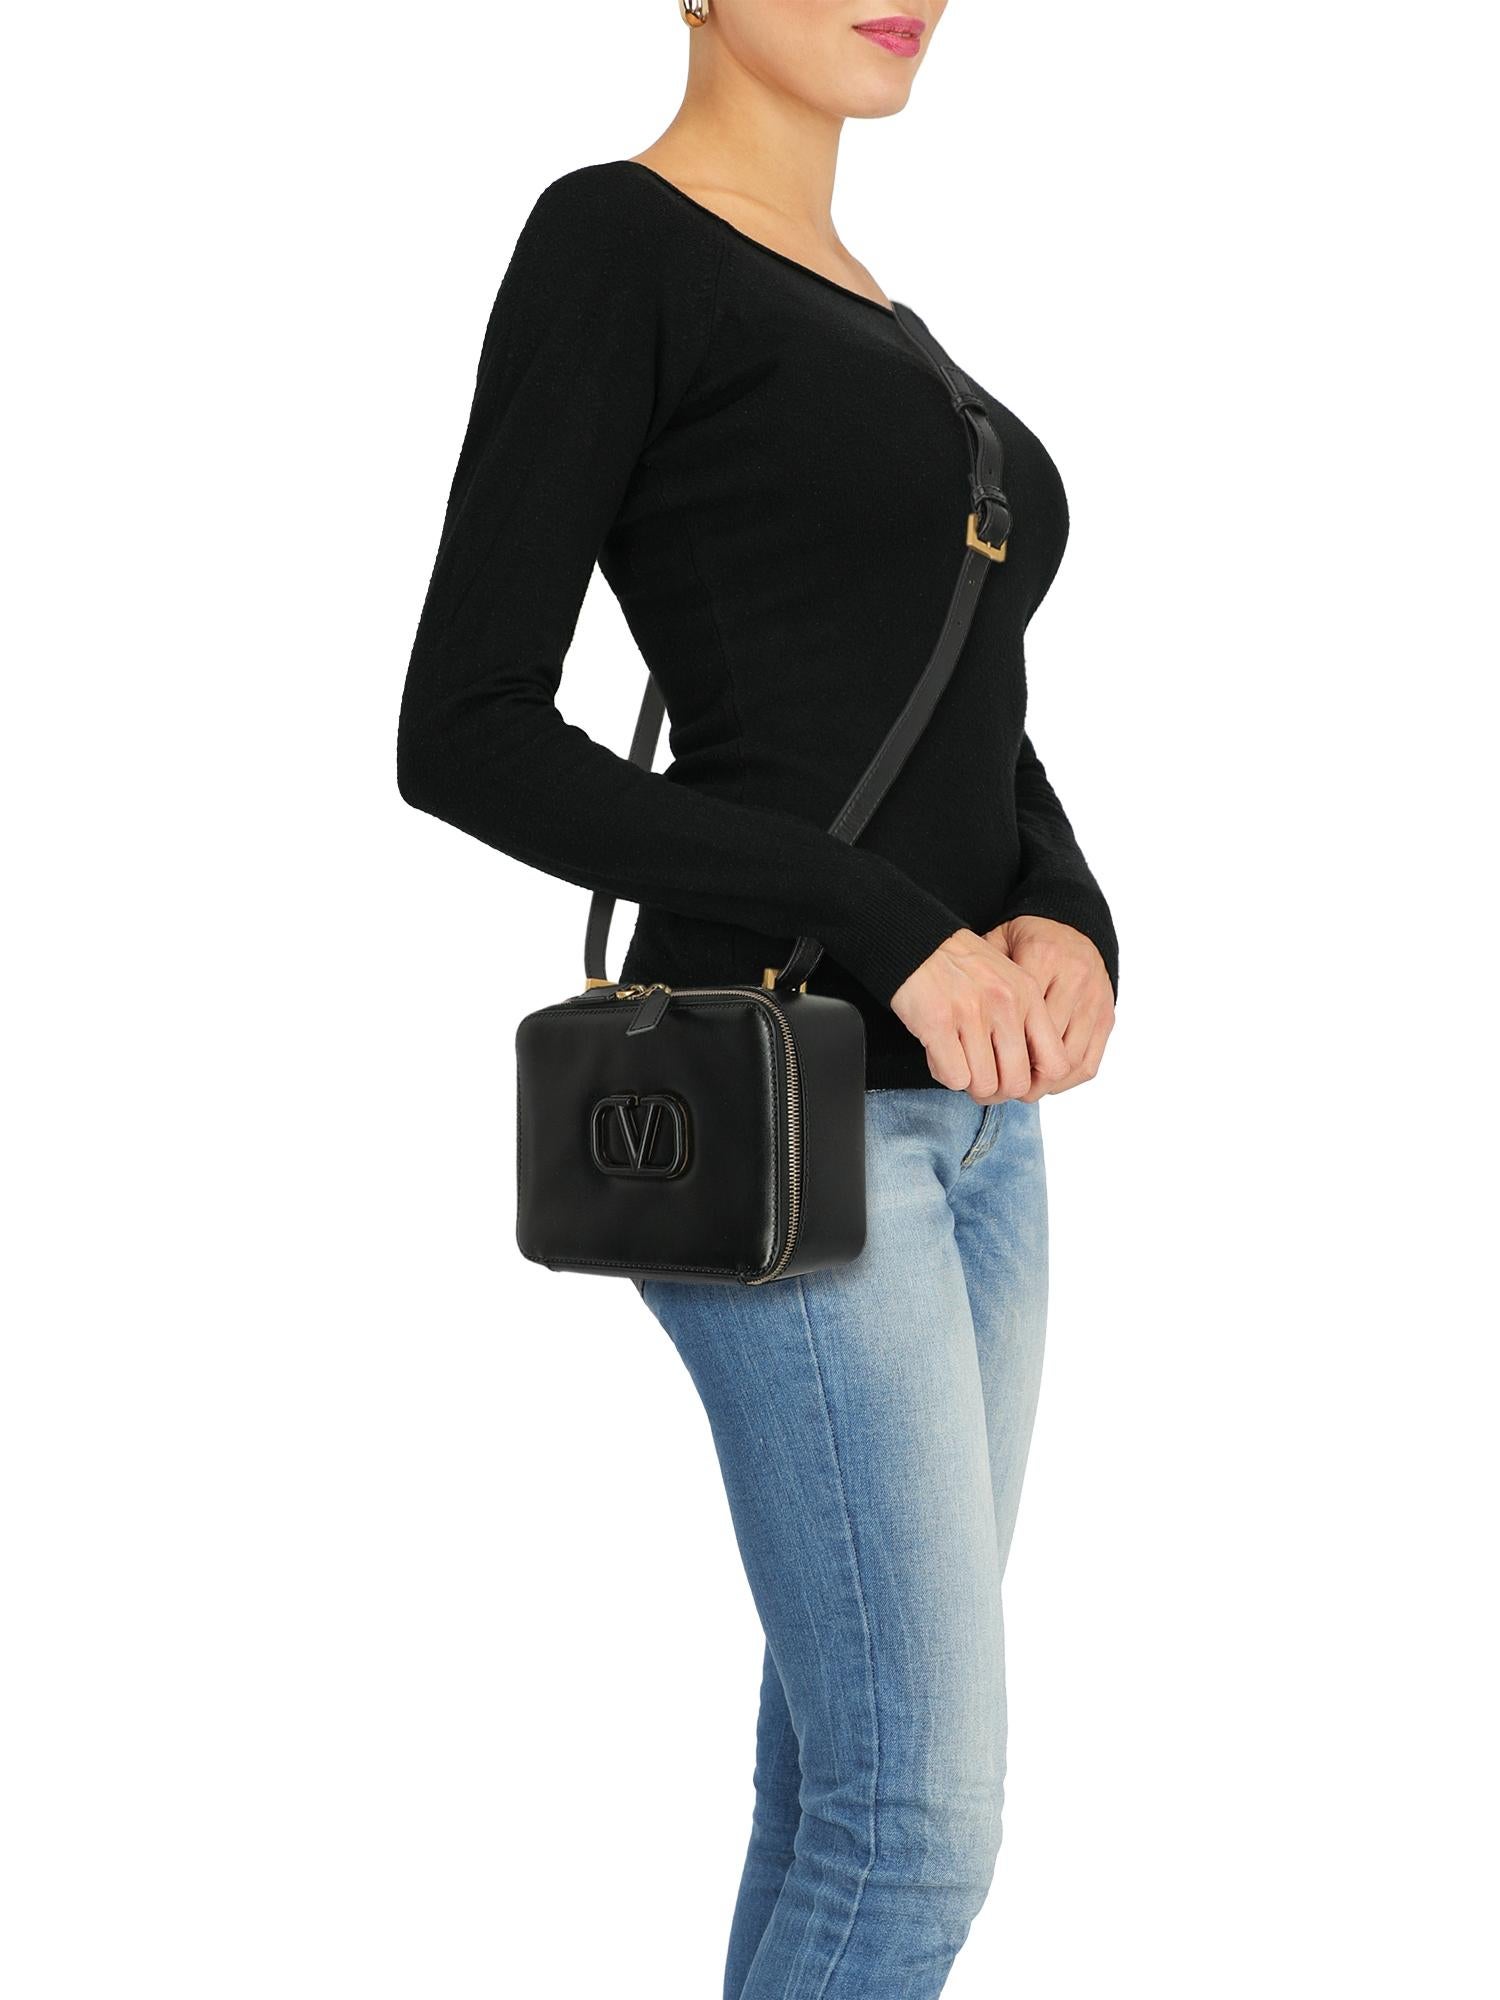 Woman, leather, solid color, front logo, adjustable shoulder strap, zipper fastening, gold-tone hardware, internal zipped pocket, day bag

Includes:
- Product care 
- Dust bag

Product Condition: Excellent
Lining: negligible marks. External Leather: